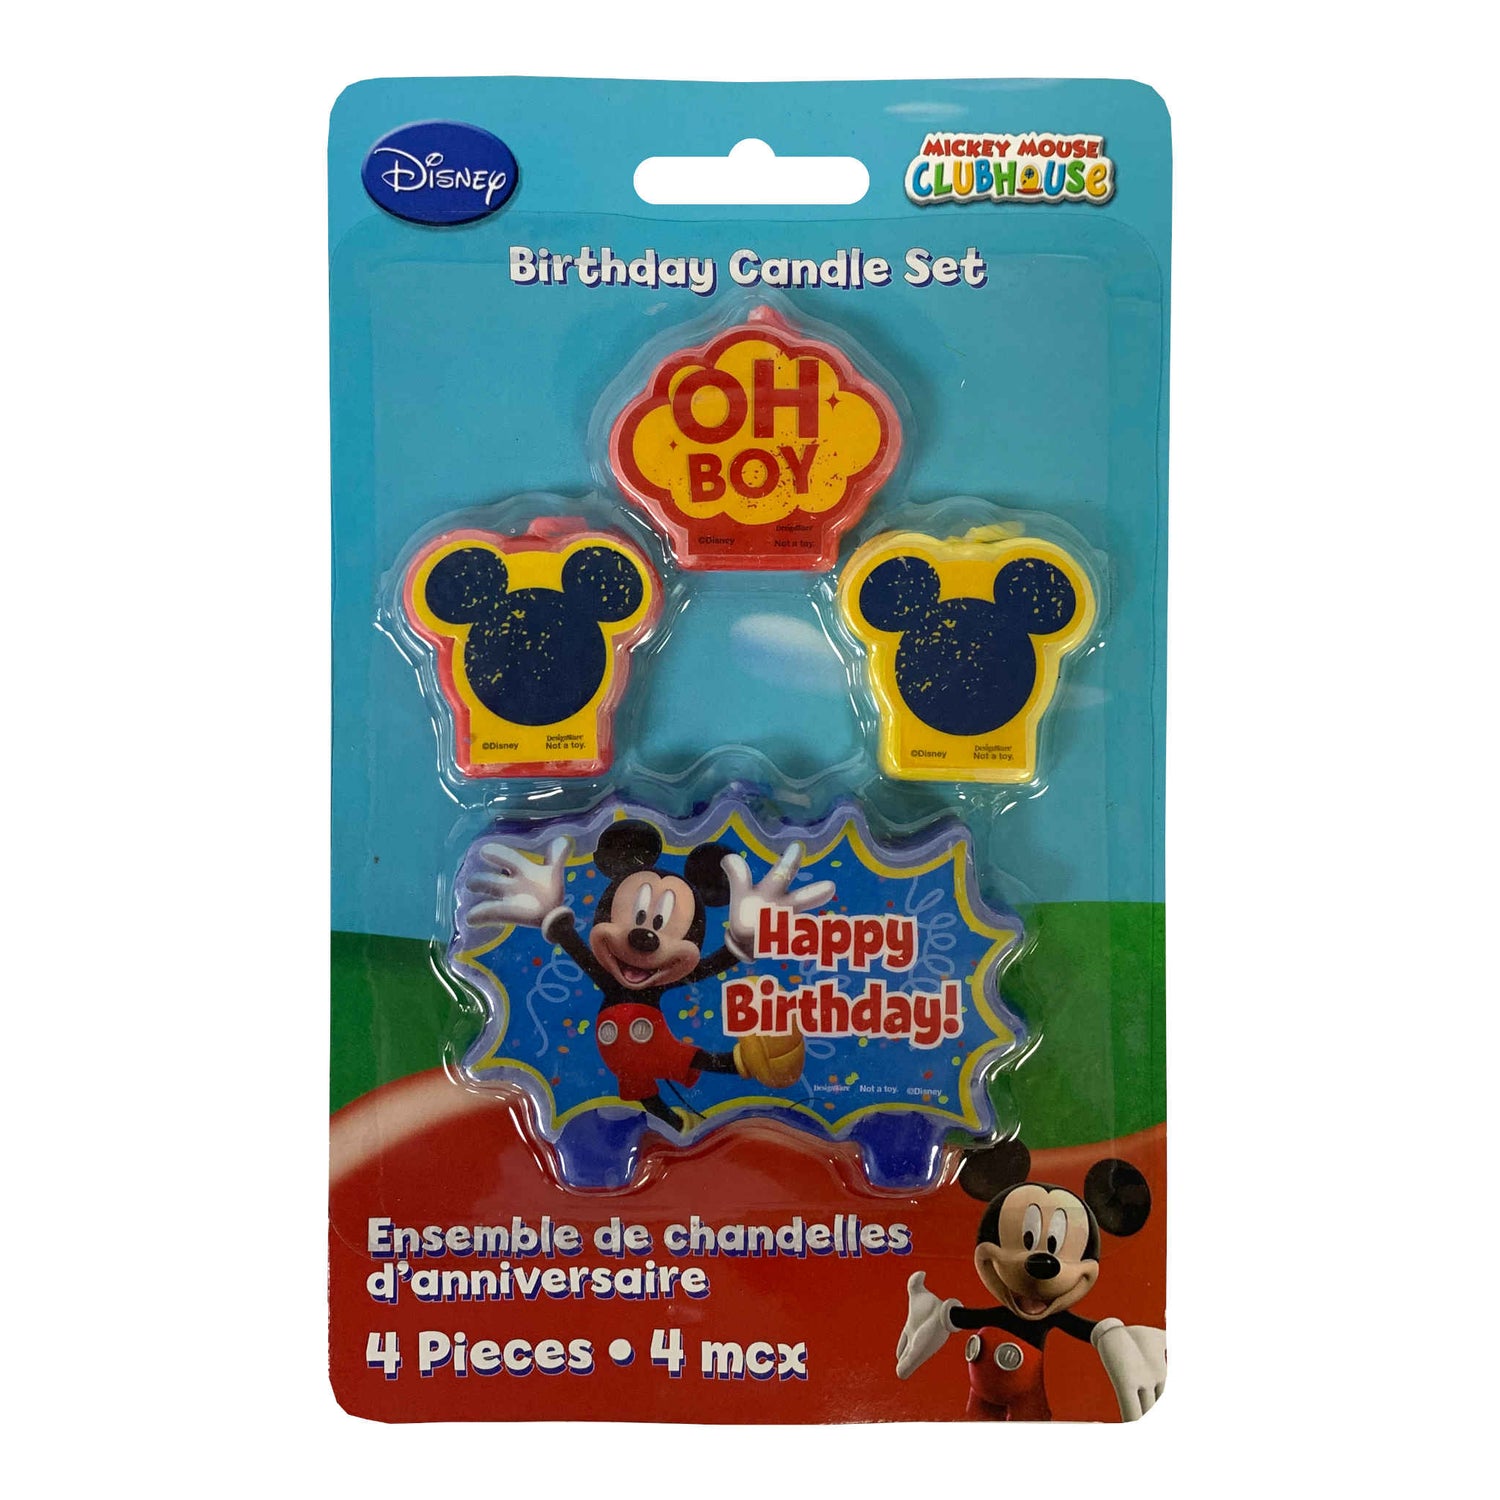 Disney Mickey Mouse Clubhouse Birthday Candle Set